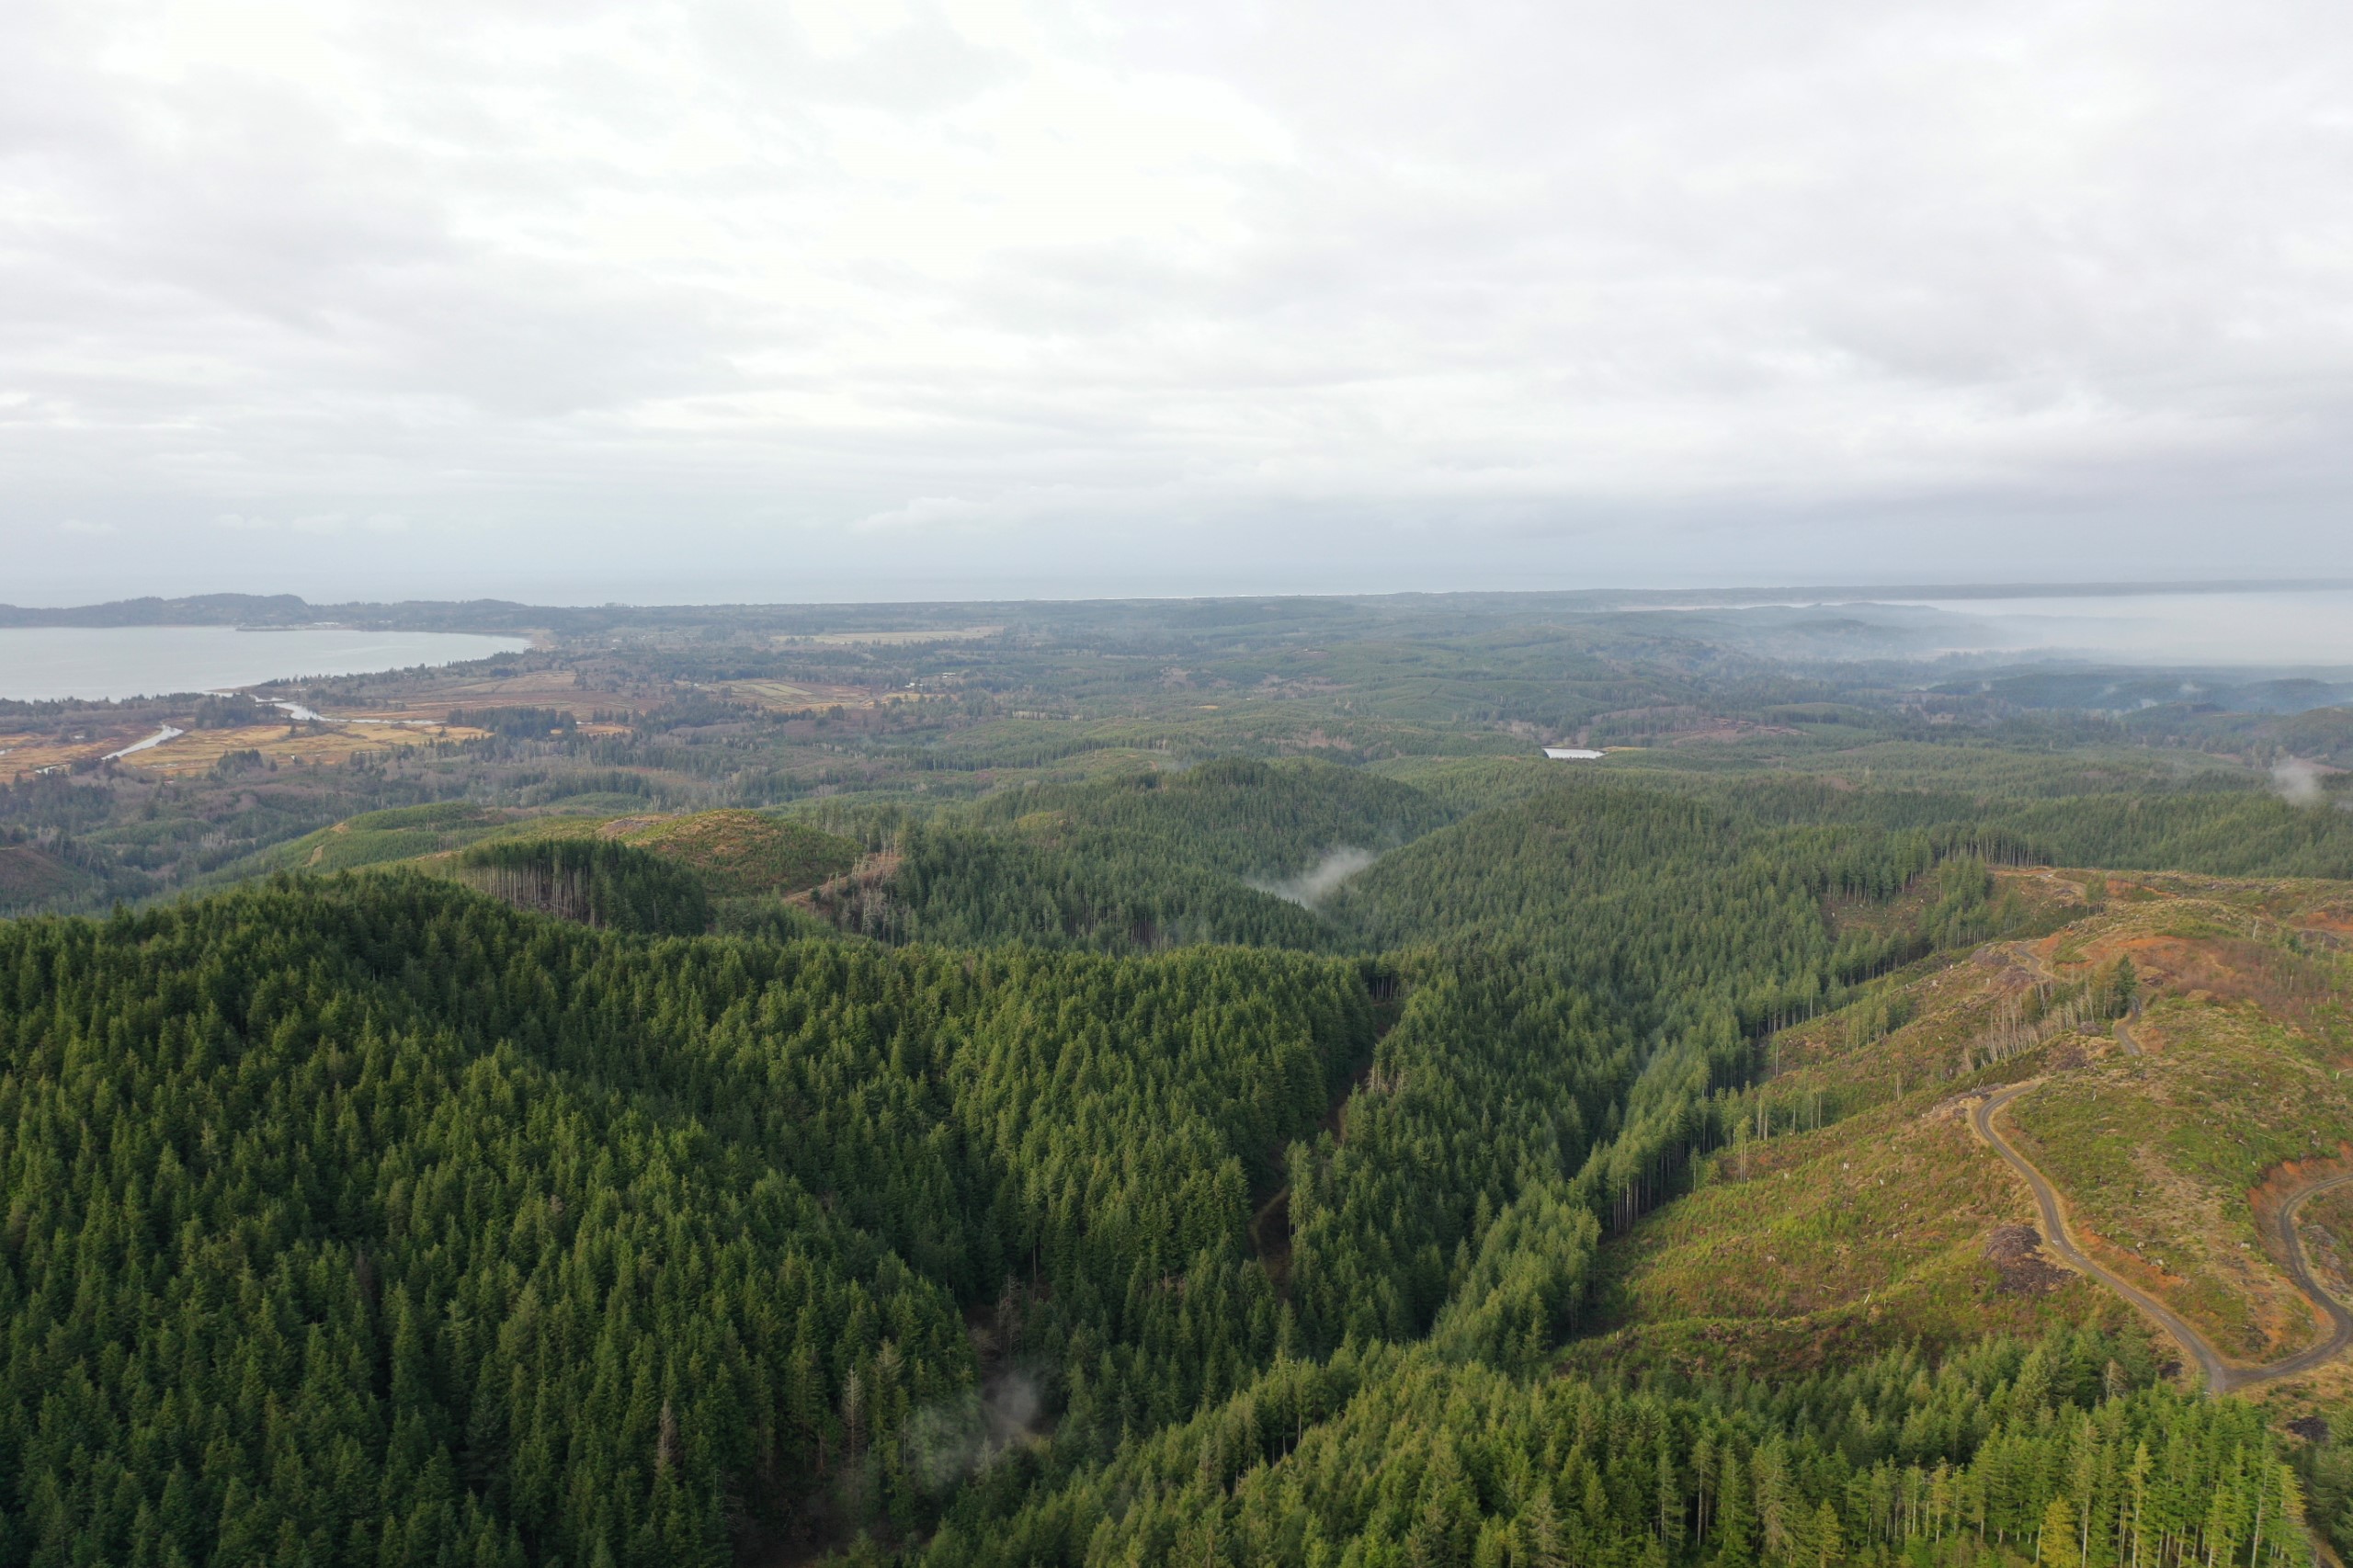 This image was tkaen from the highest point in the watershed.